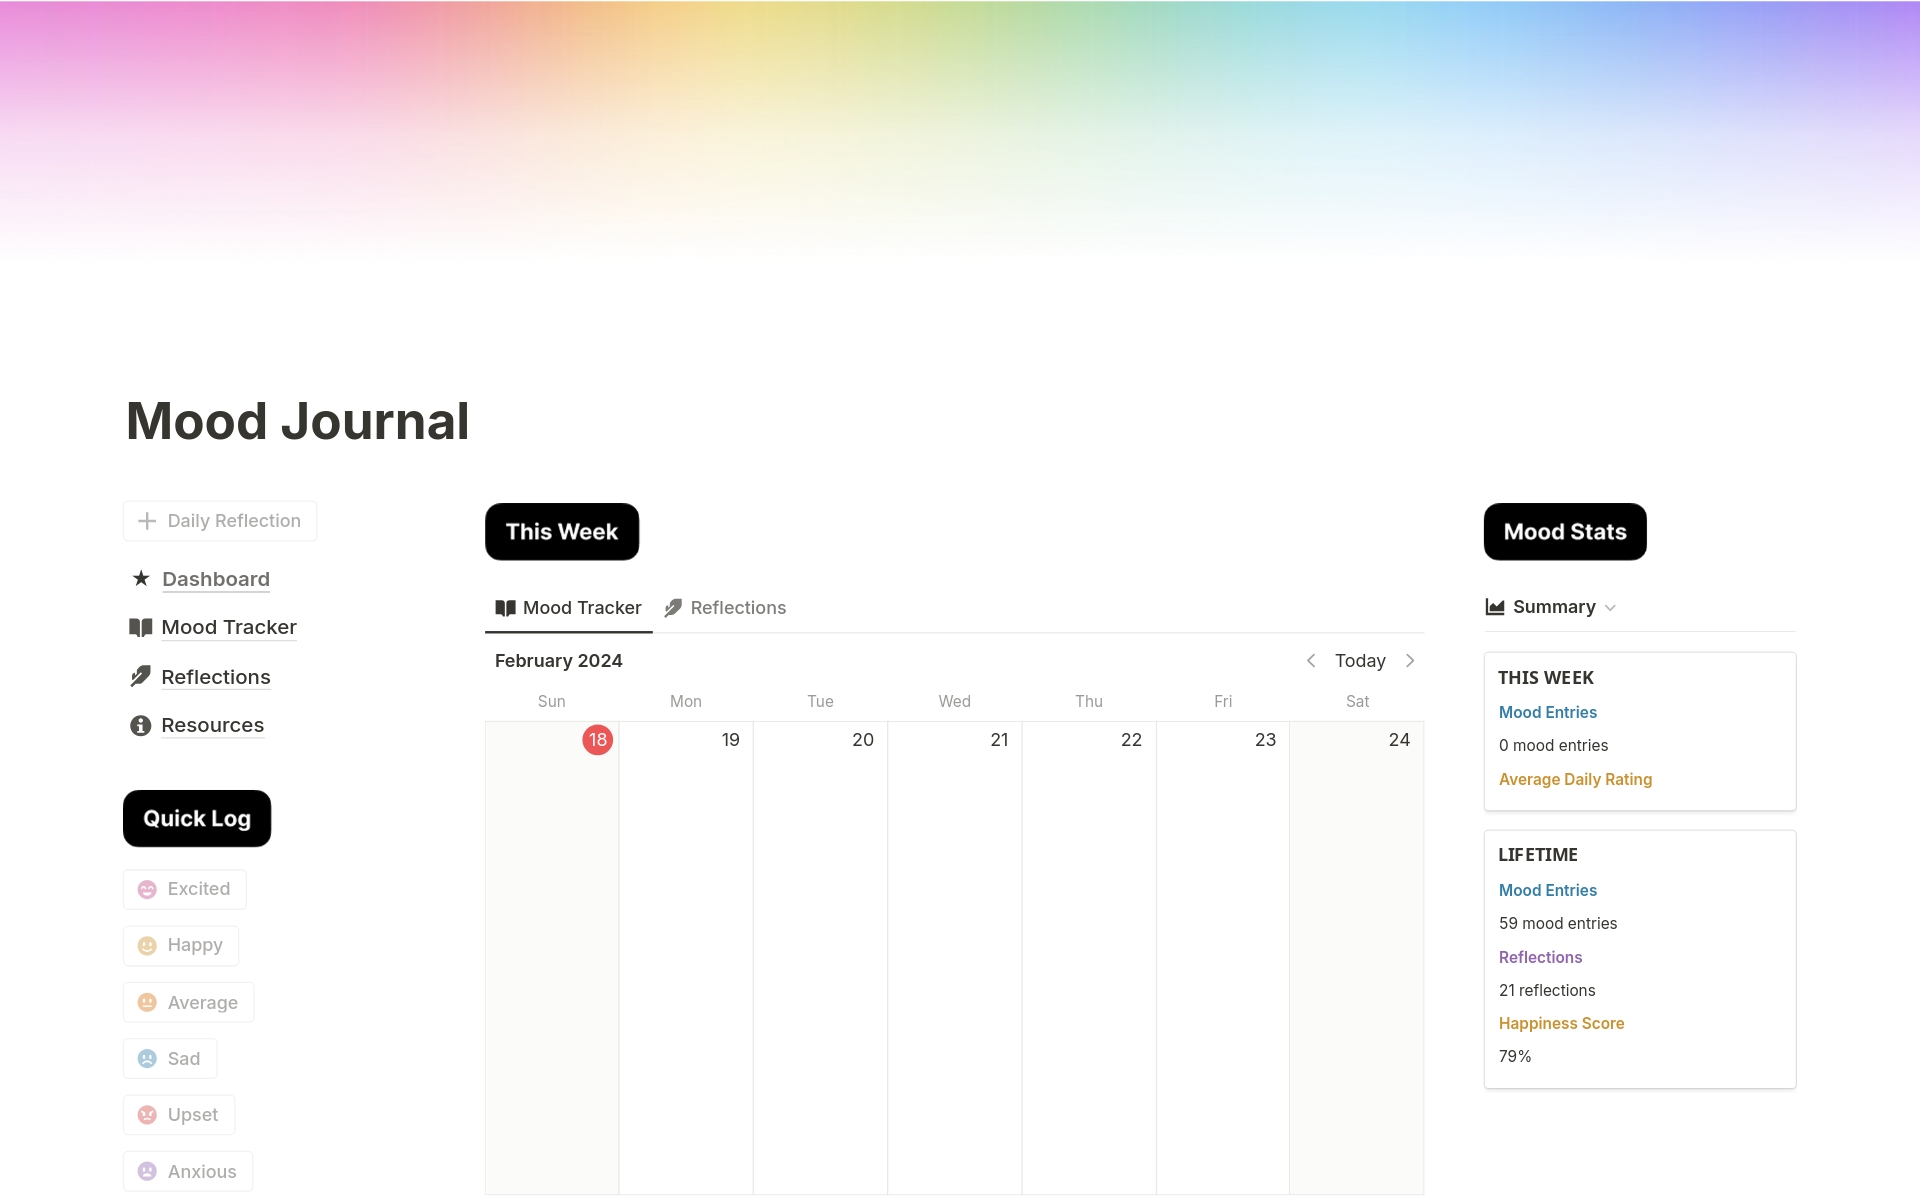 Mood Journal is a mood tracking system that lets you log your mood with one click, keep daily reflections, and receive stats about your mood.